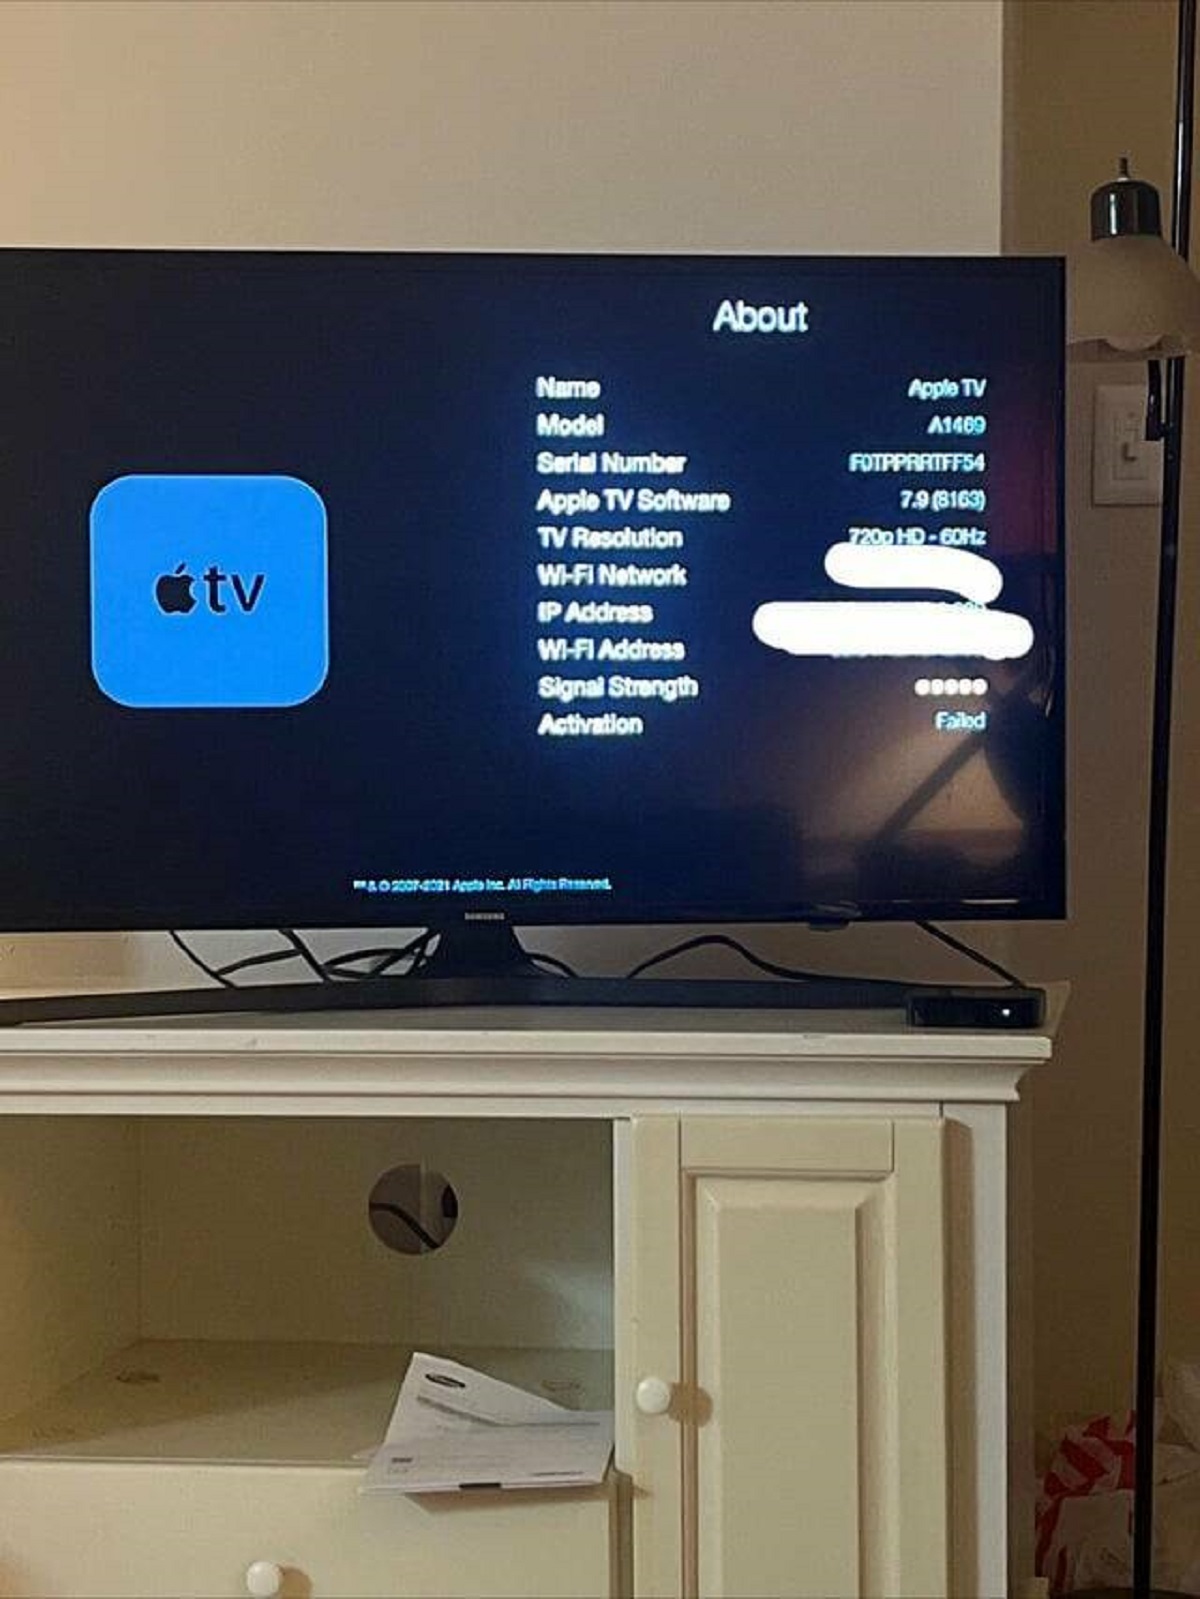 "Bought what was supposed to be a 4th gen Apple TV…"